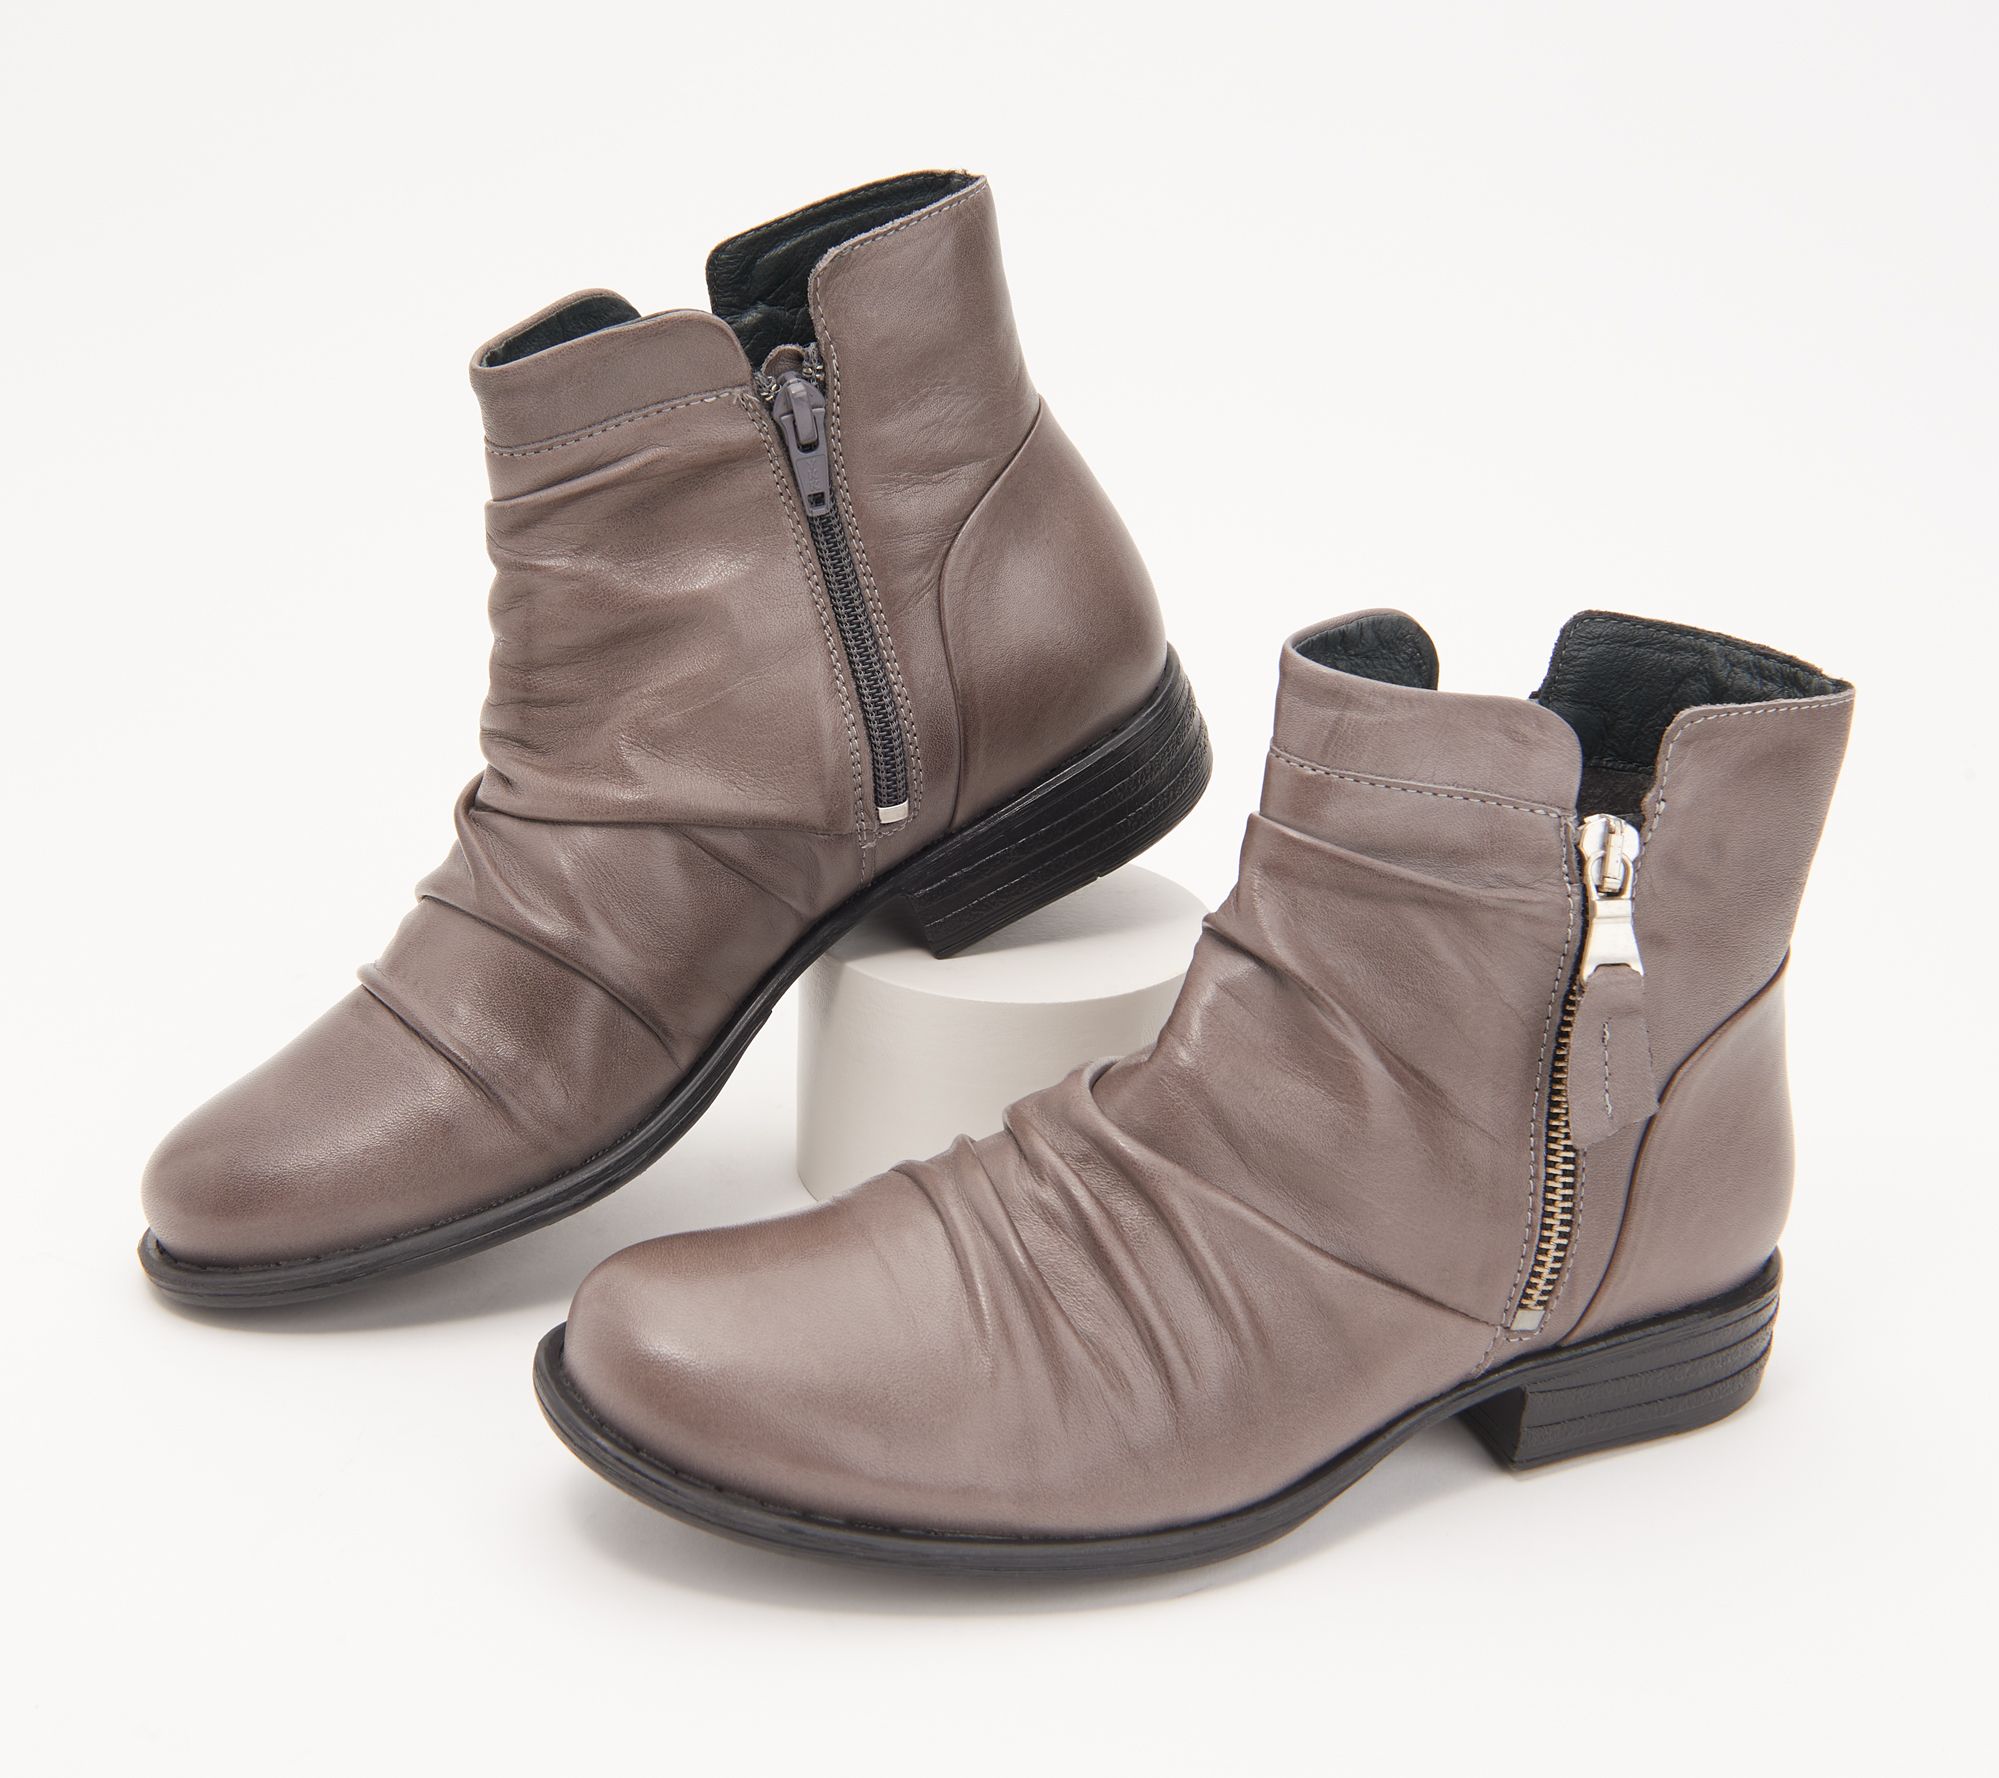 Miz Mooz Leather Button Ankle Boots - Lowe 